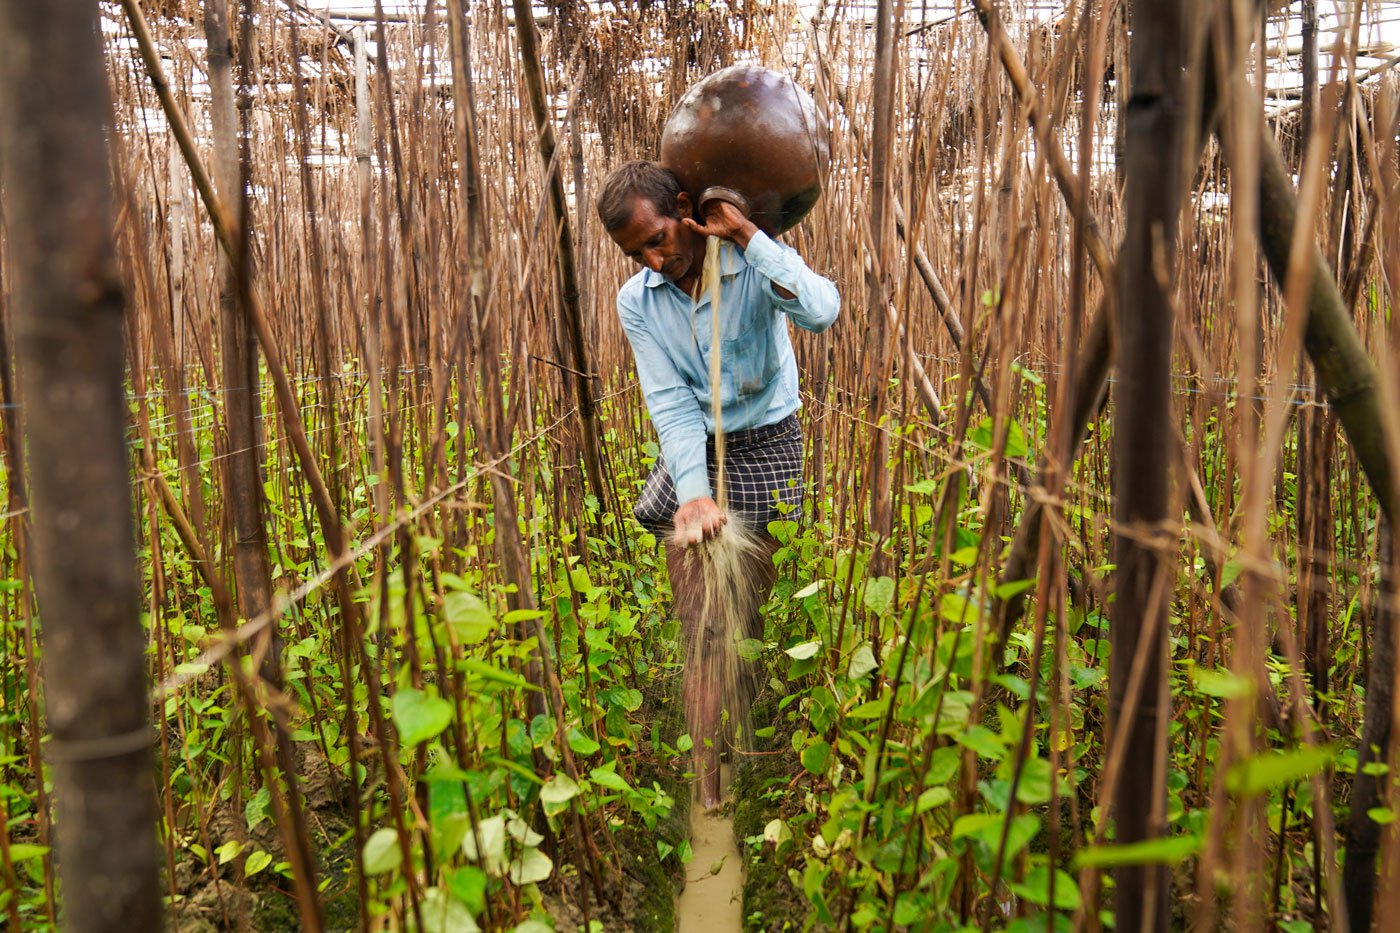 Ajay is sprinkling water on betel plants. He places an earthen pot on his shoulder and puts his palm on the mouth of the pot. As he walks in the furrows the water drips onto the vines